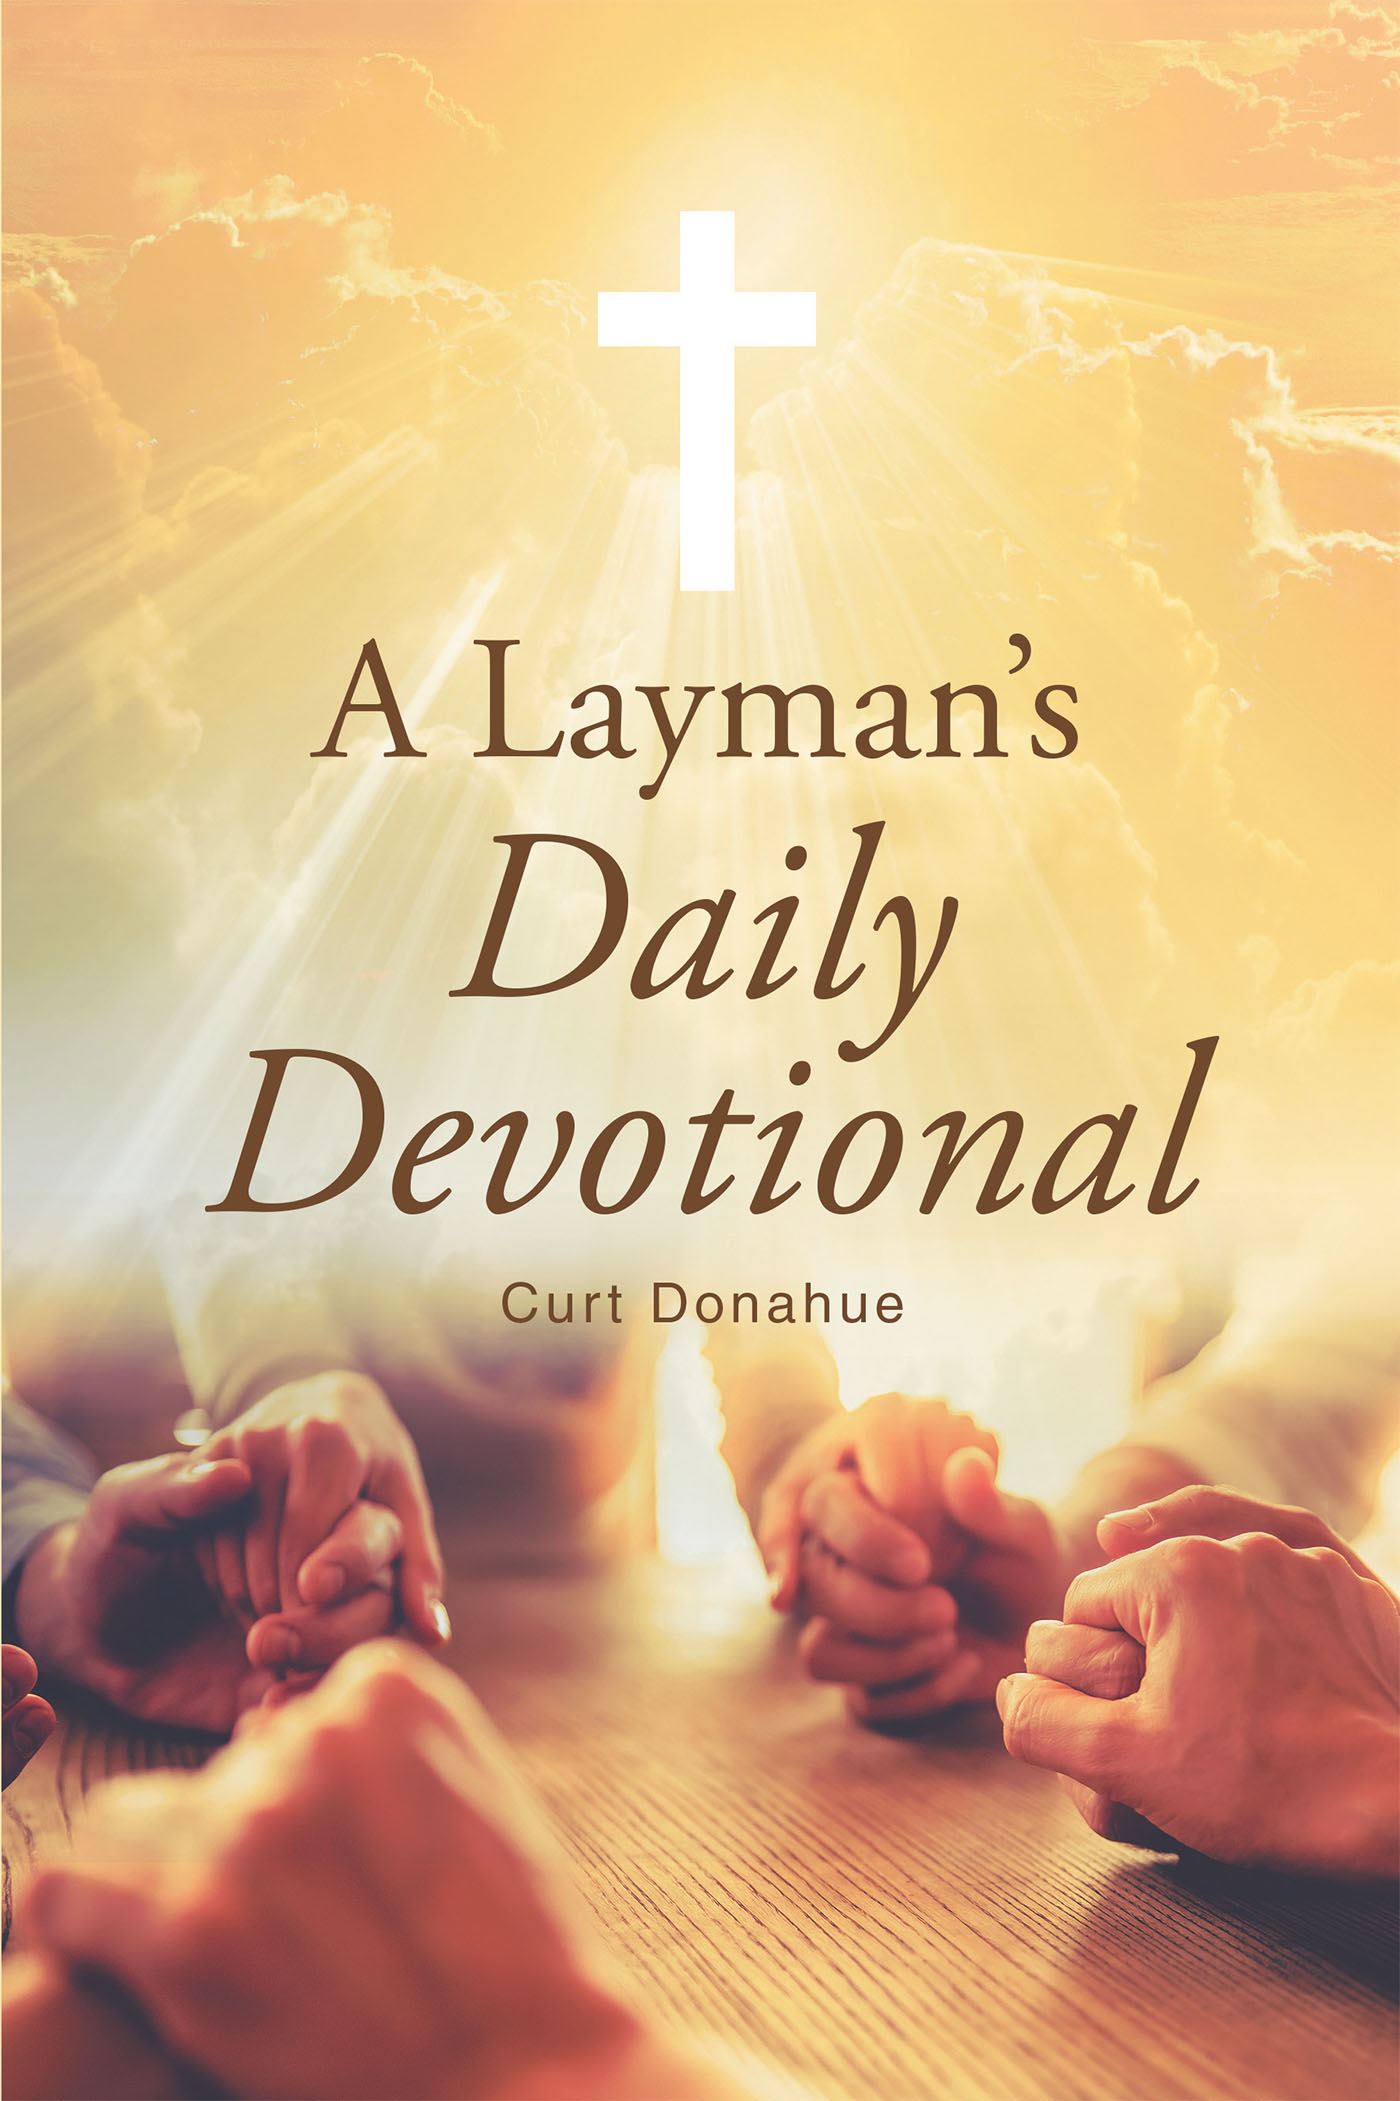 author-curt-donahue-s-newly-released-a-layman-s-daily-devotional-is-a